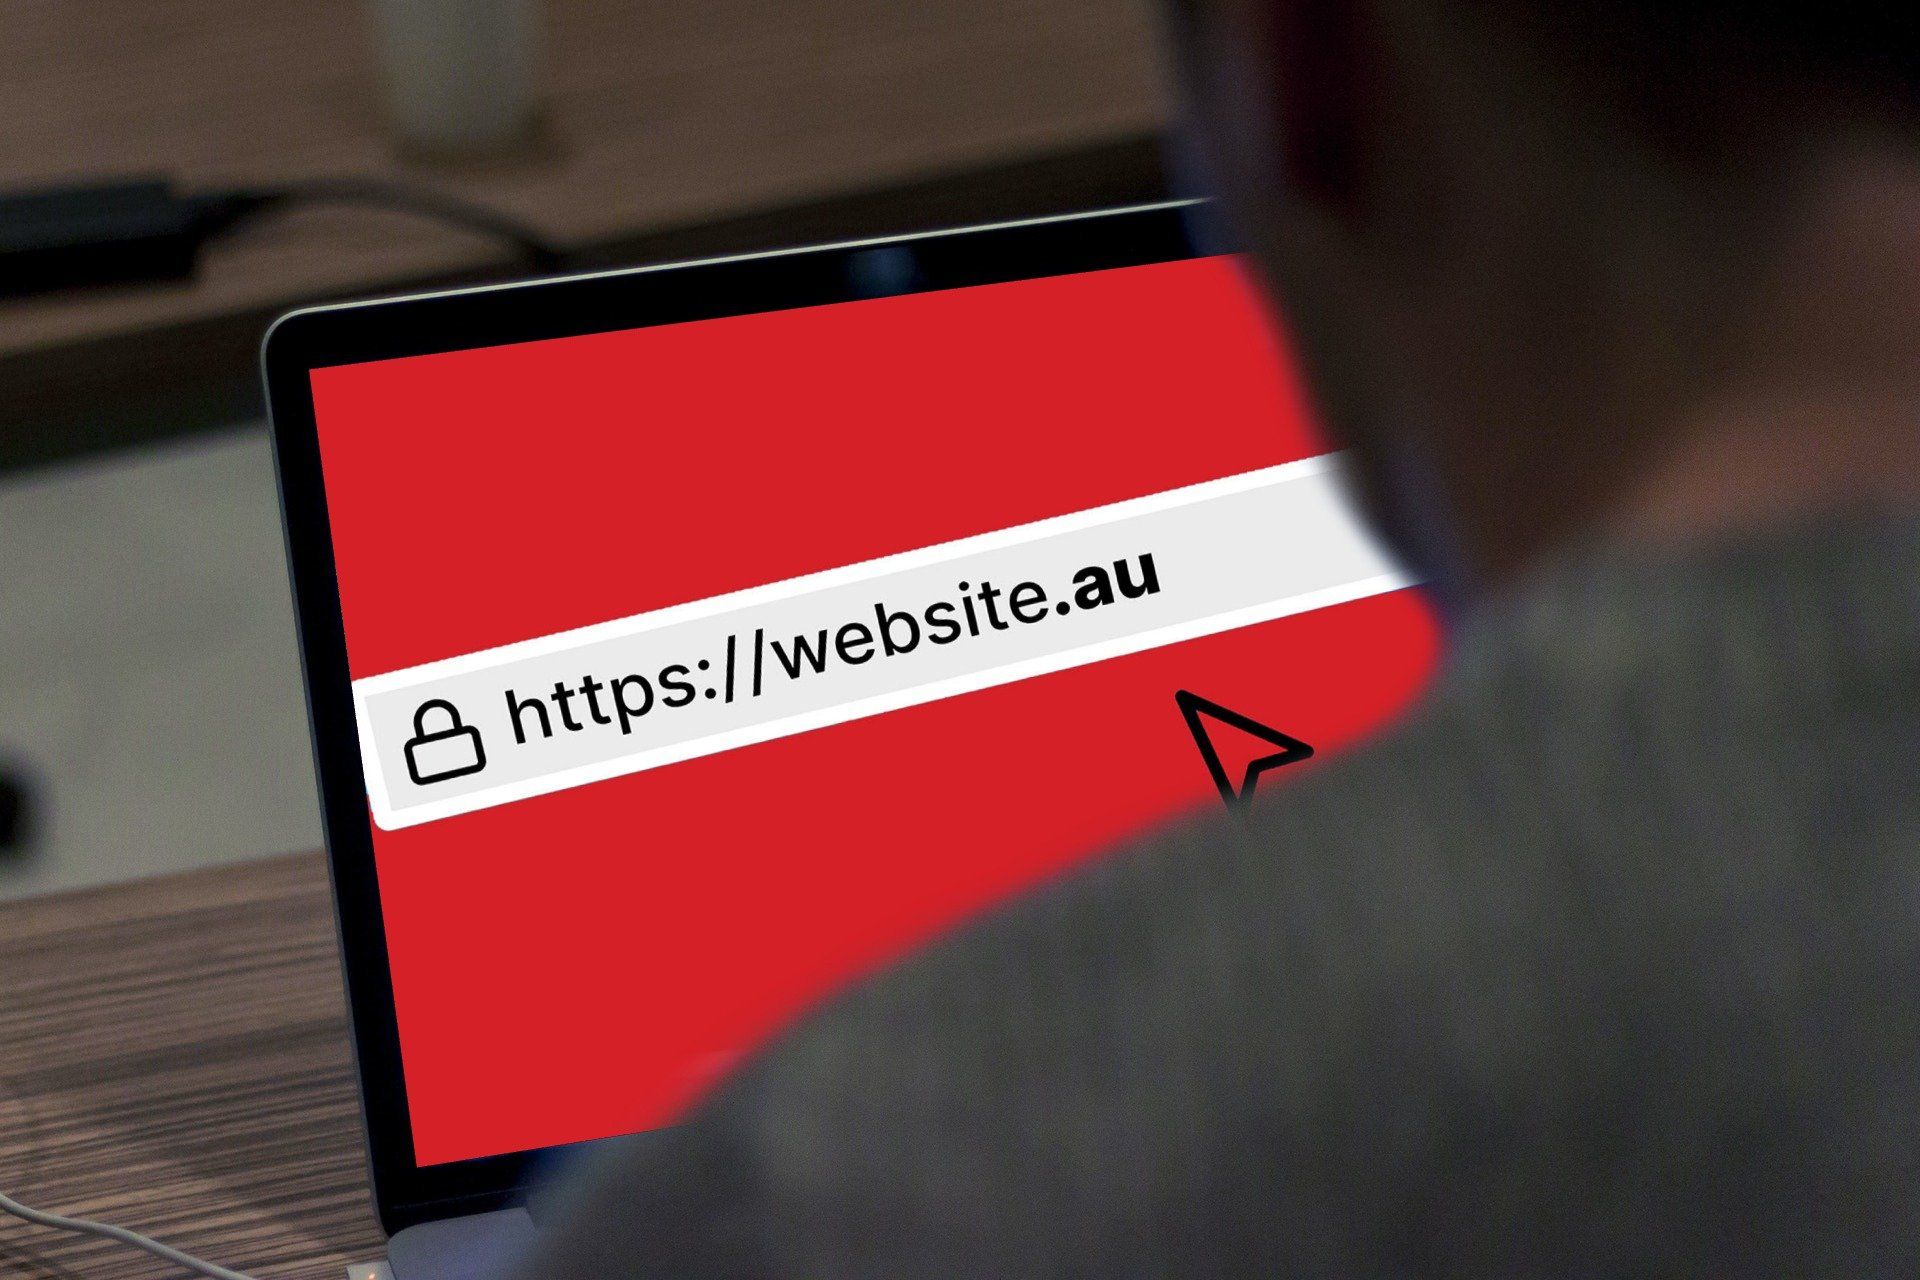 a person is looking at a laptop that says https://website.au